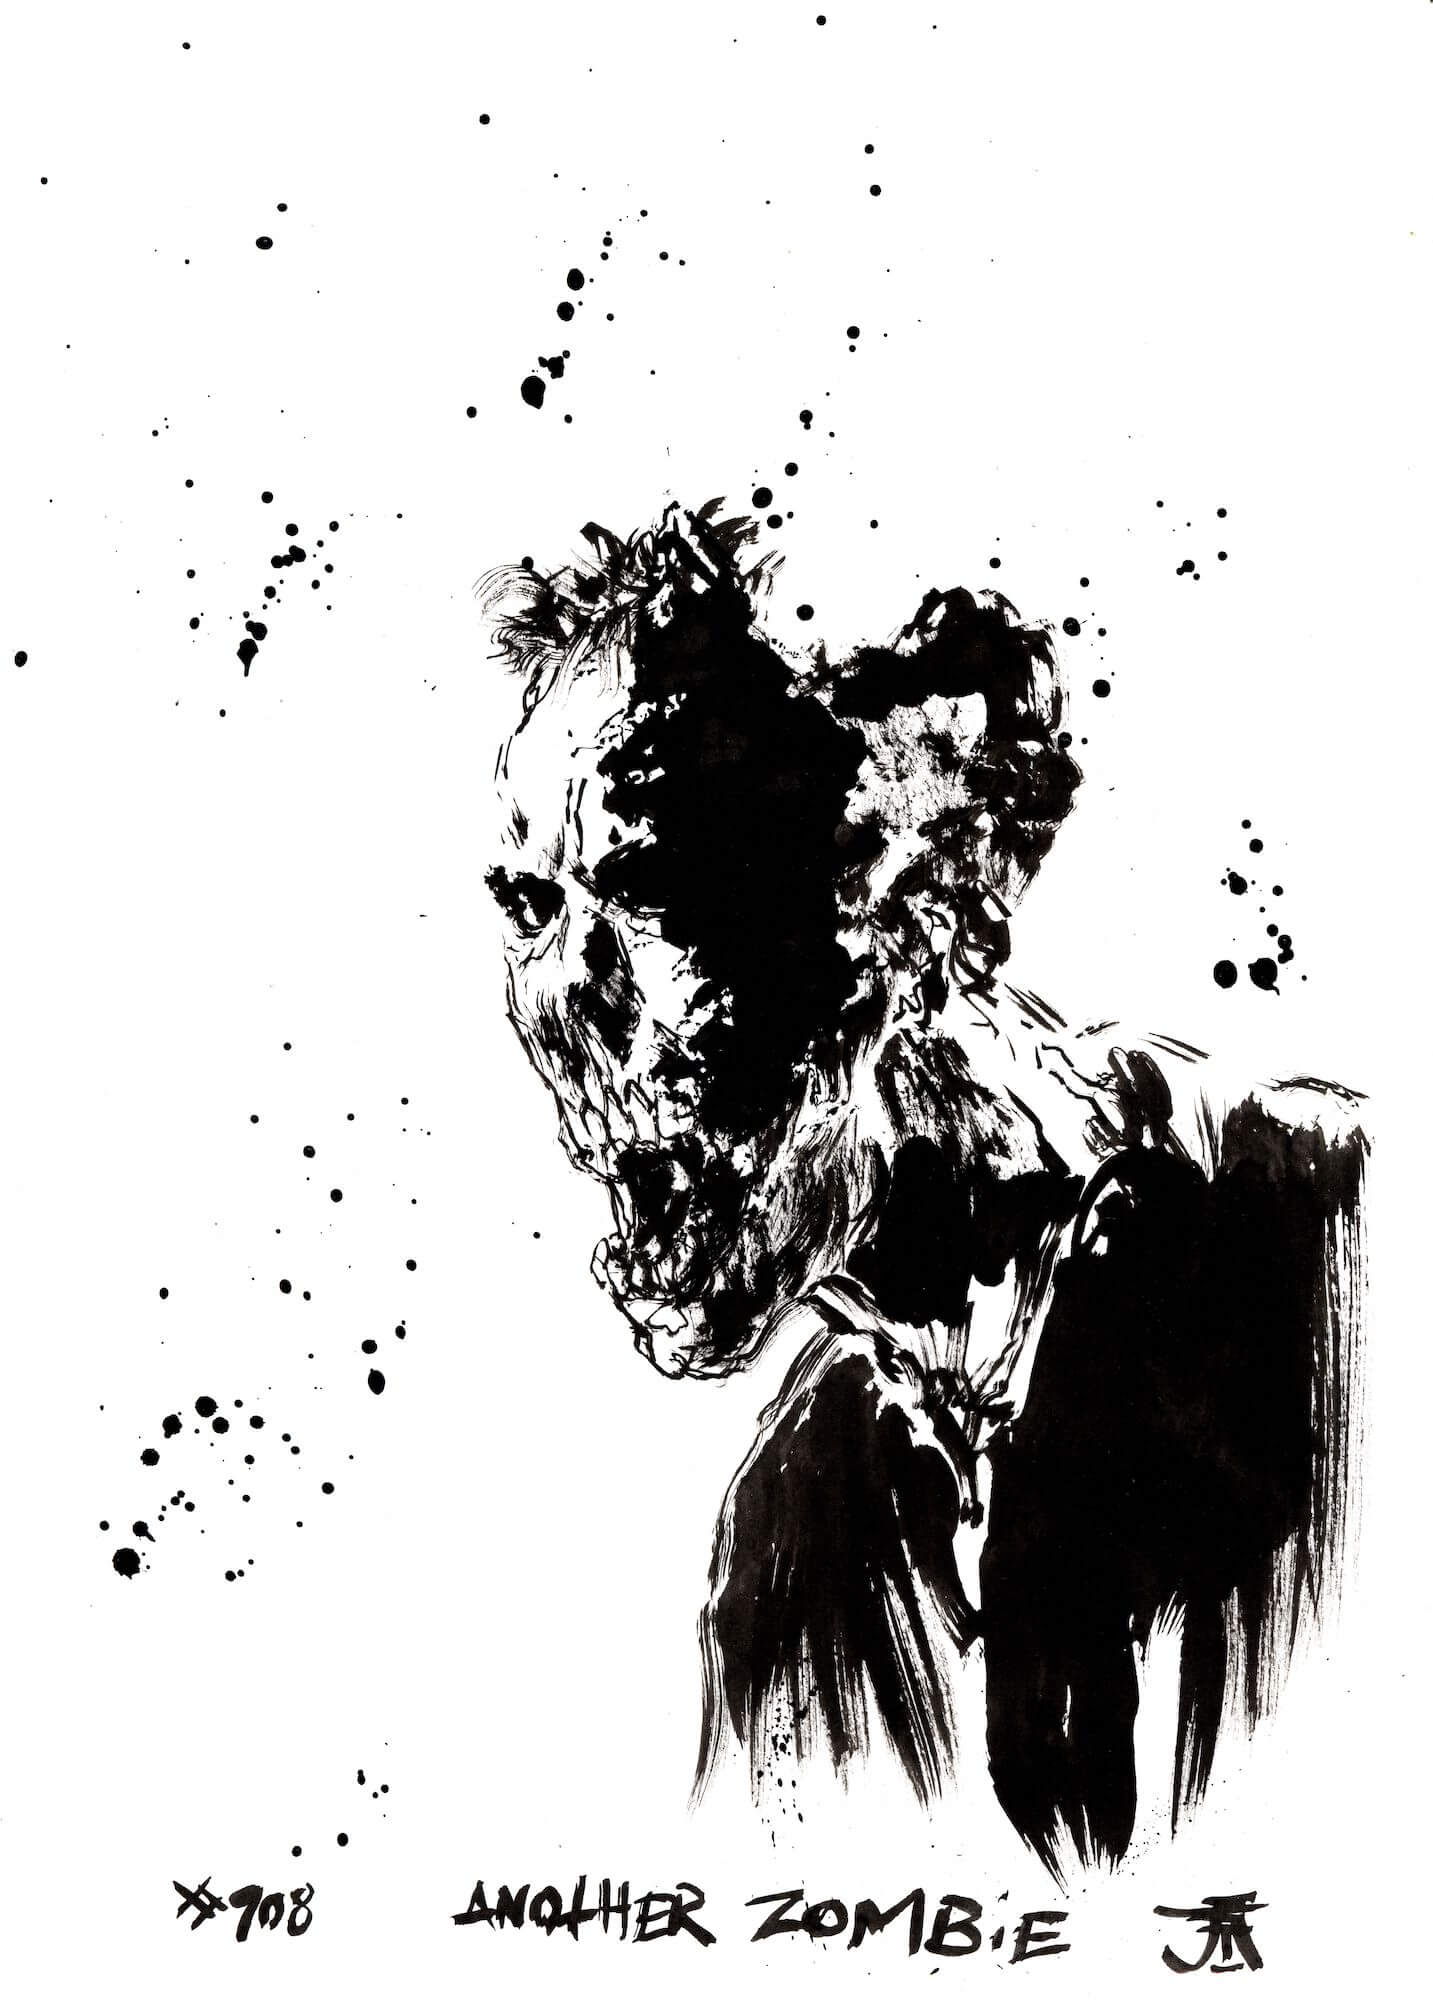 #908 - Another Zombie